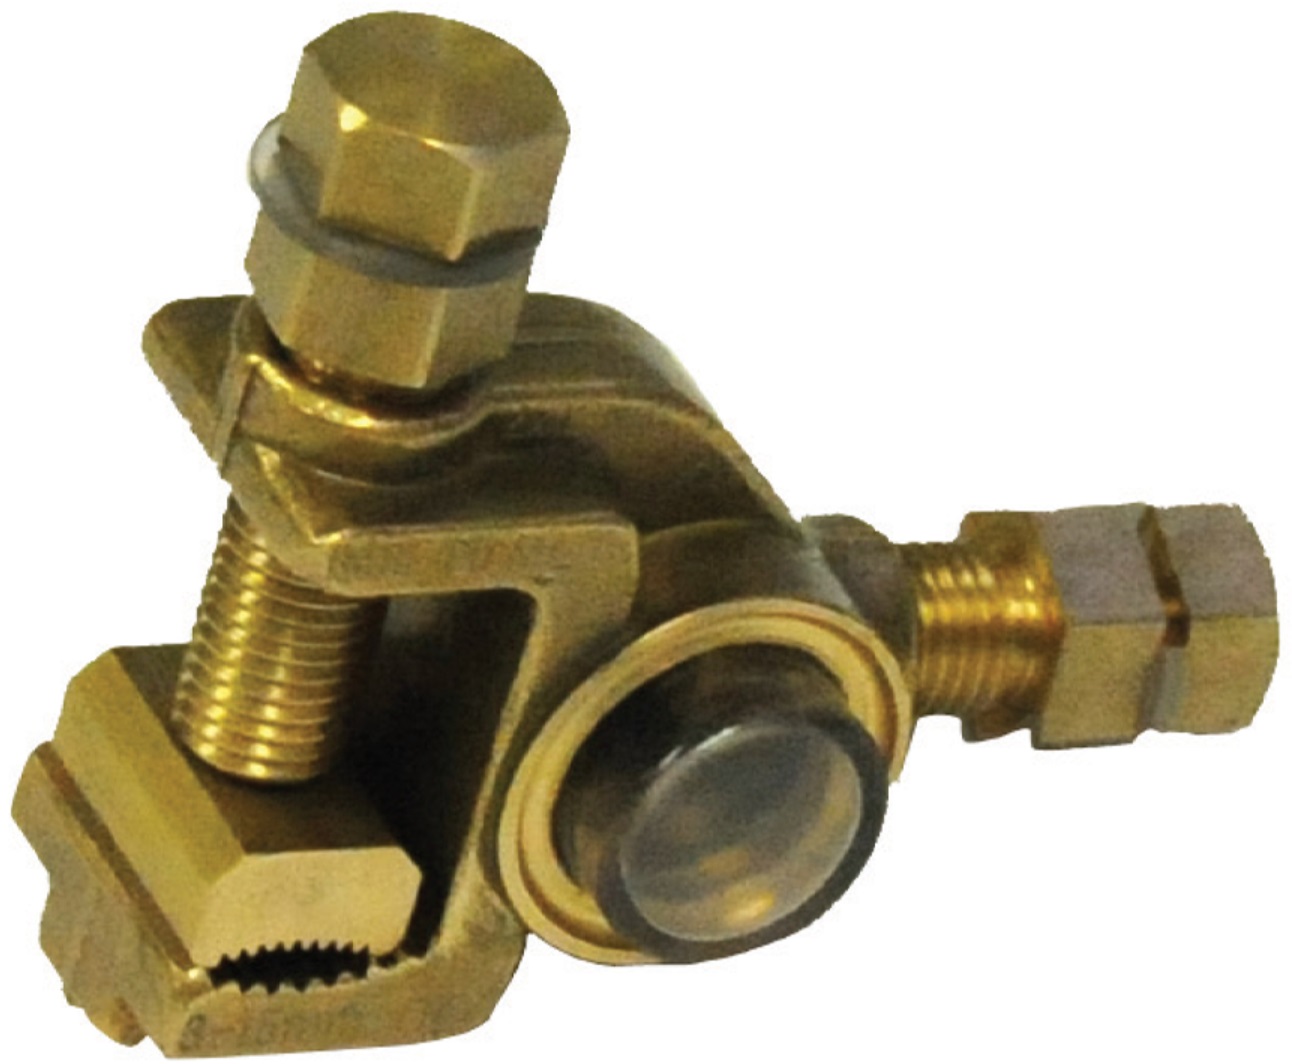 Tap of Connector Mains 3-15 Cu Tap 6-35 INS - PLP R235